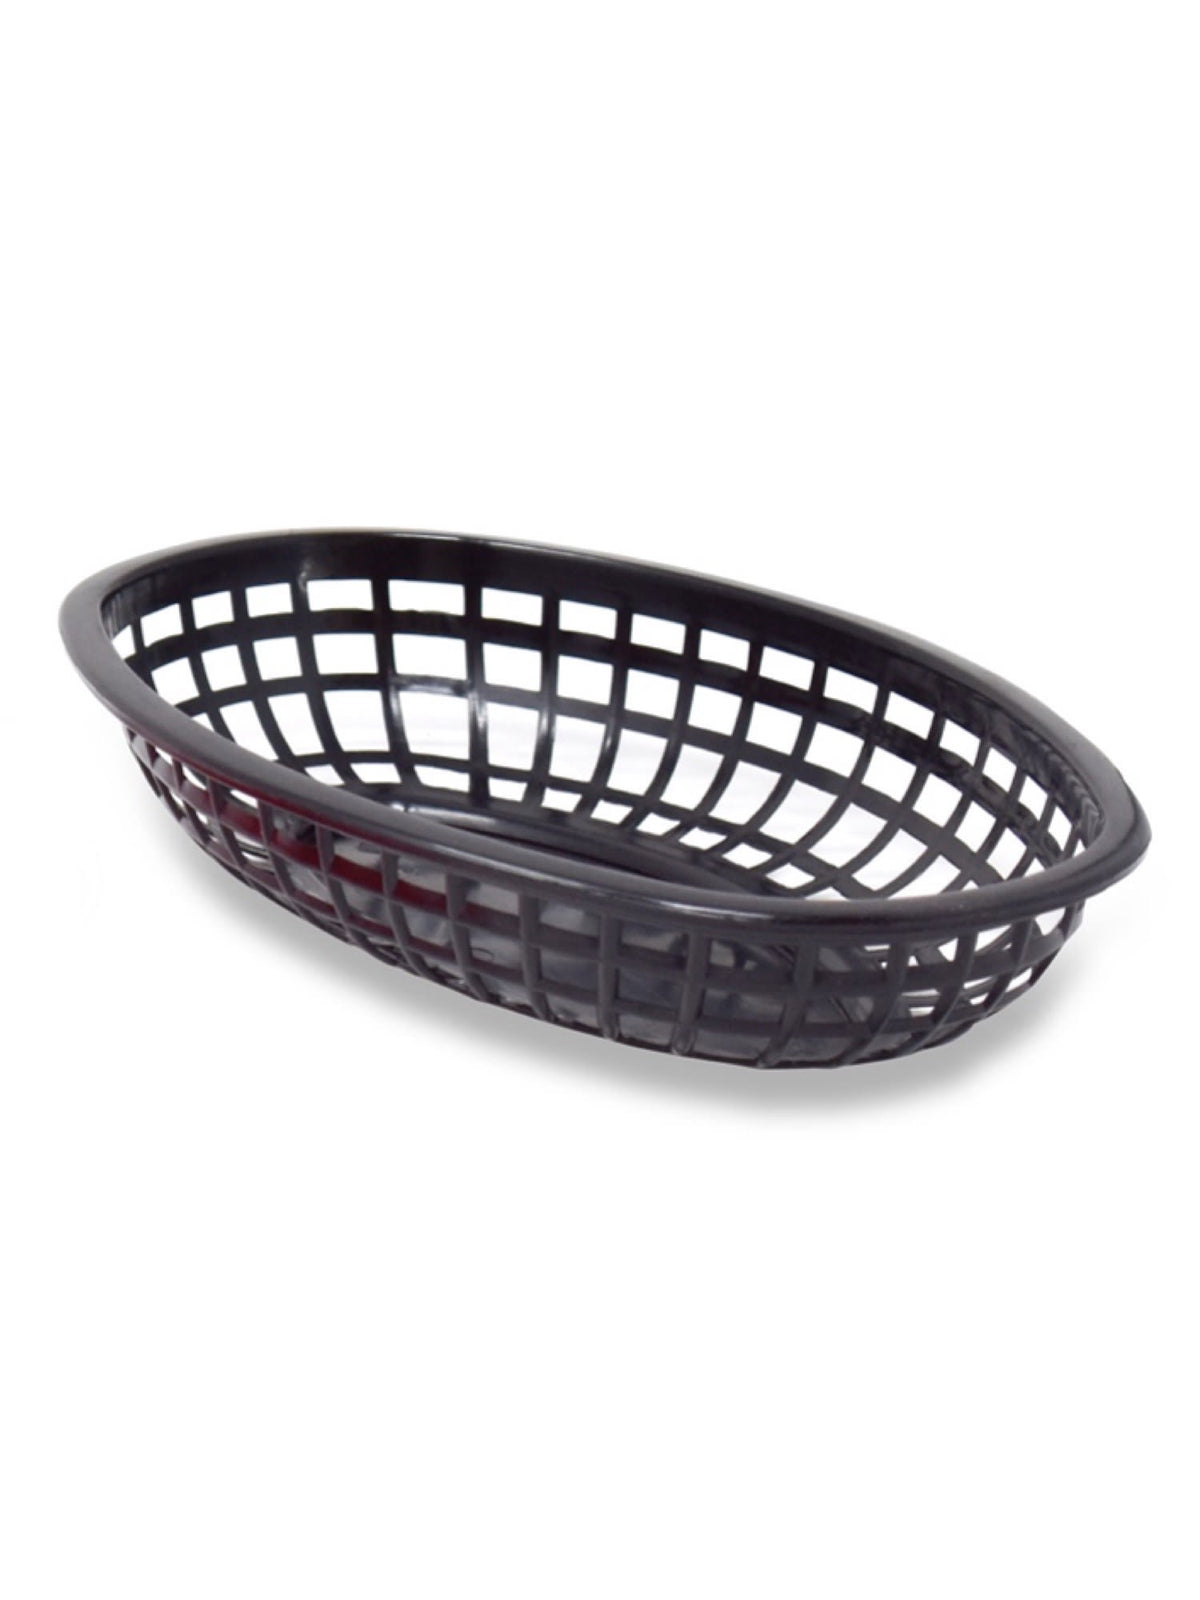 Make serving fast food more cozy and practical with this classic basket